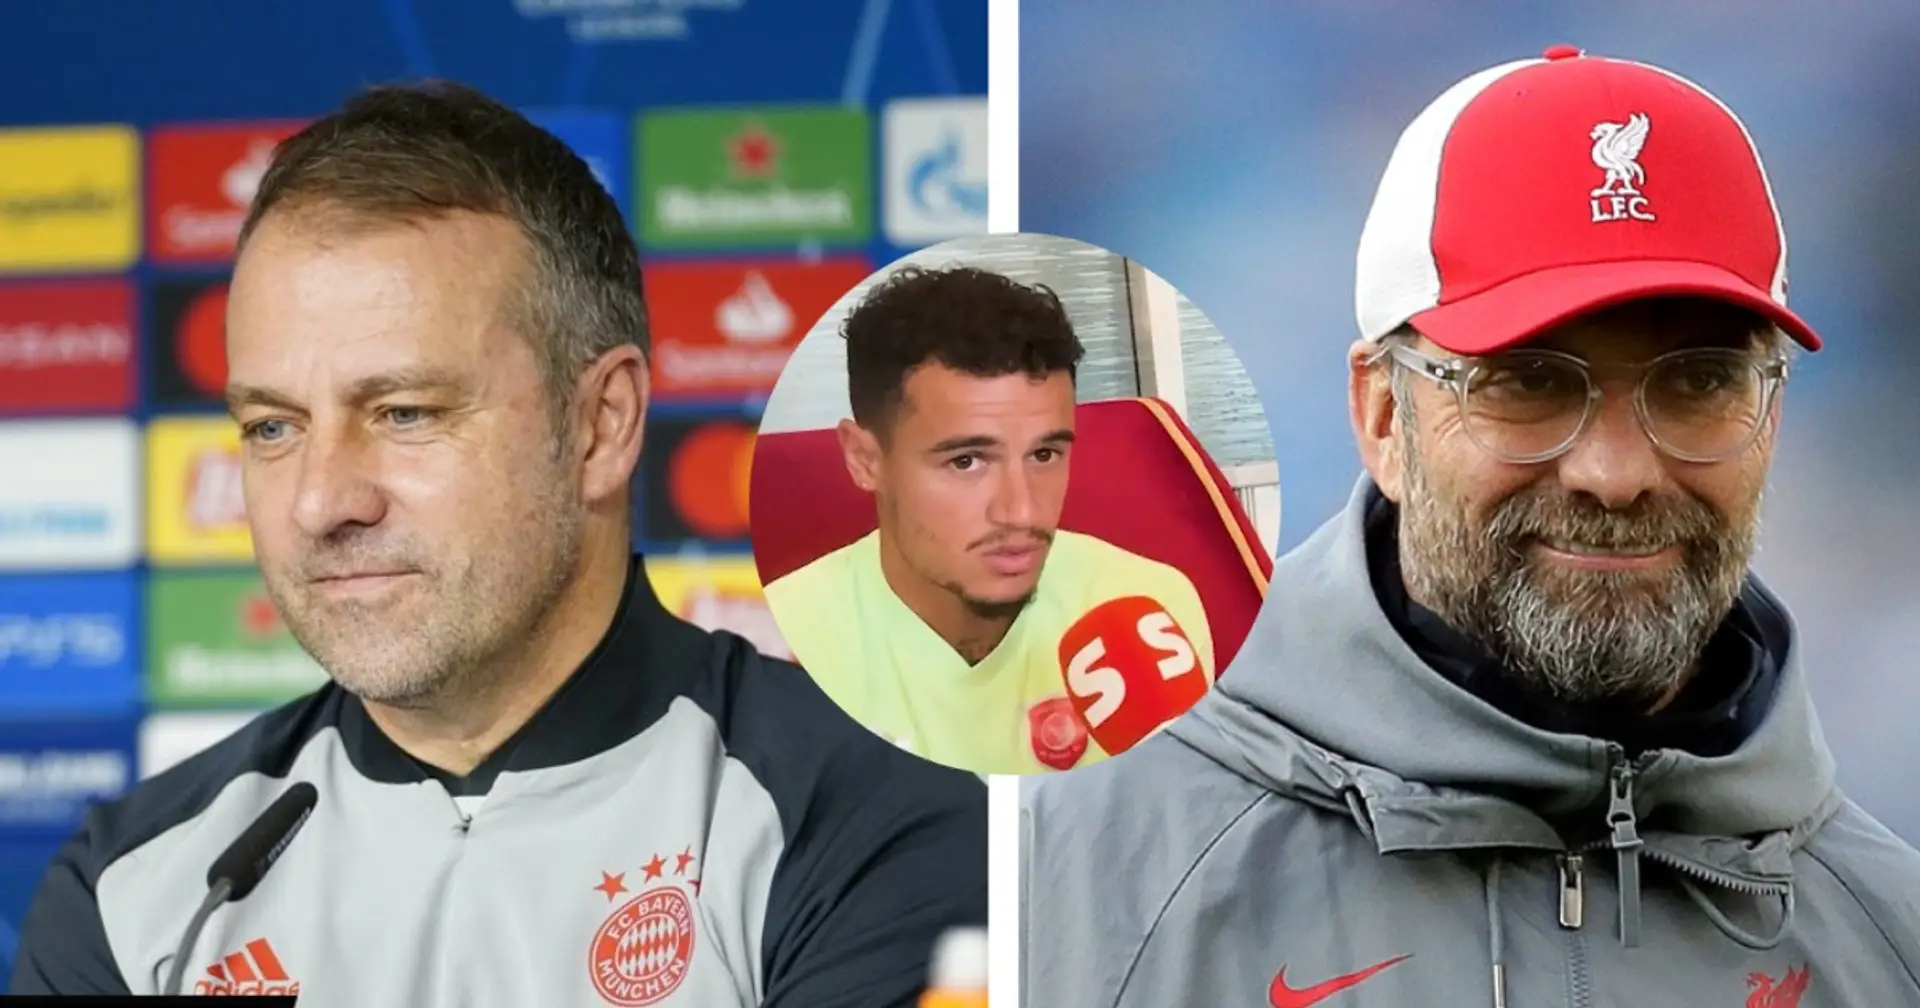 Flick or Klopp? Coutinho makes his pick to replace Xavi at Barca